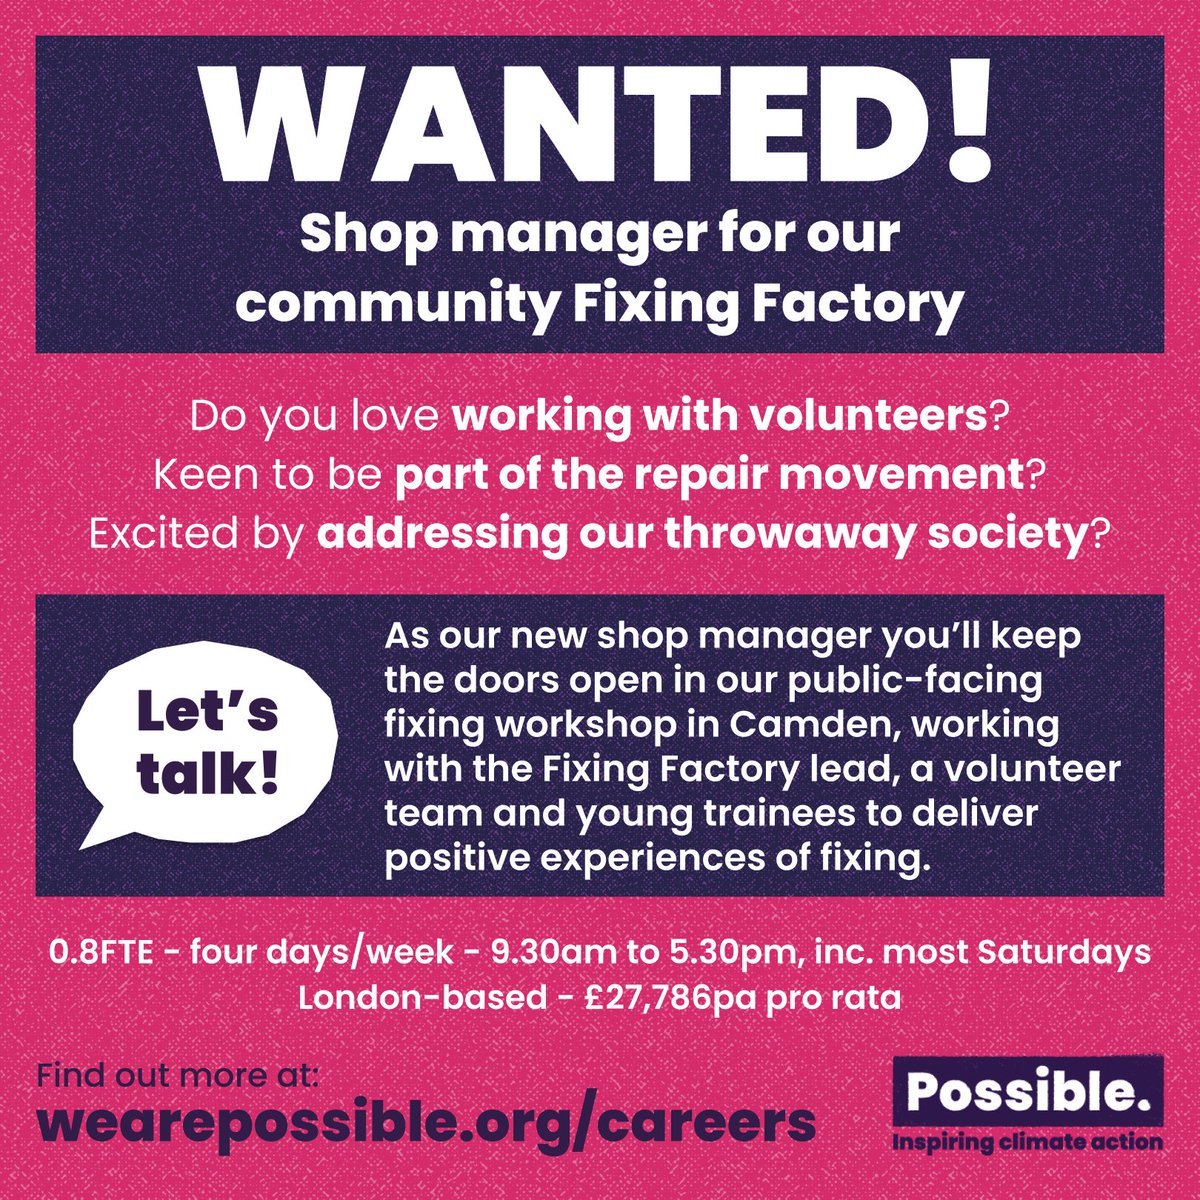 We are incredibly excited to be hiring a (work)shop manager for our Fixing Factory in #QueensCrescent

Could it be you?

Working with the community and a great volunteer team you'd run our flagship and help it thrive!

Full details at: wearepossible.org/careers
#NW5 #KentishTown